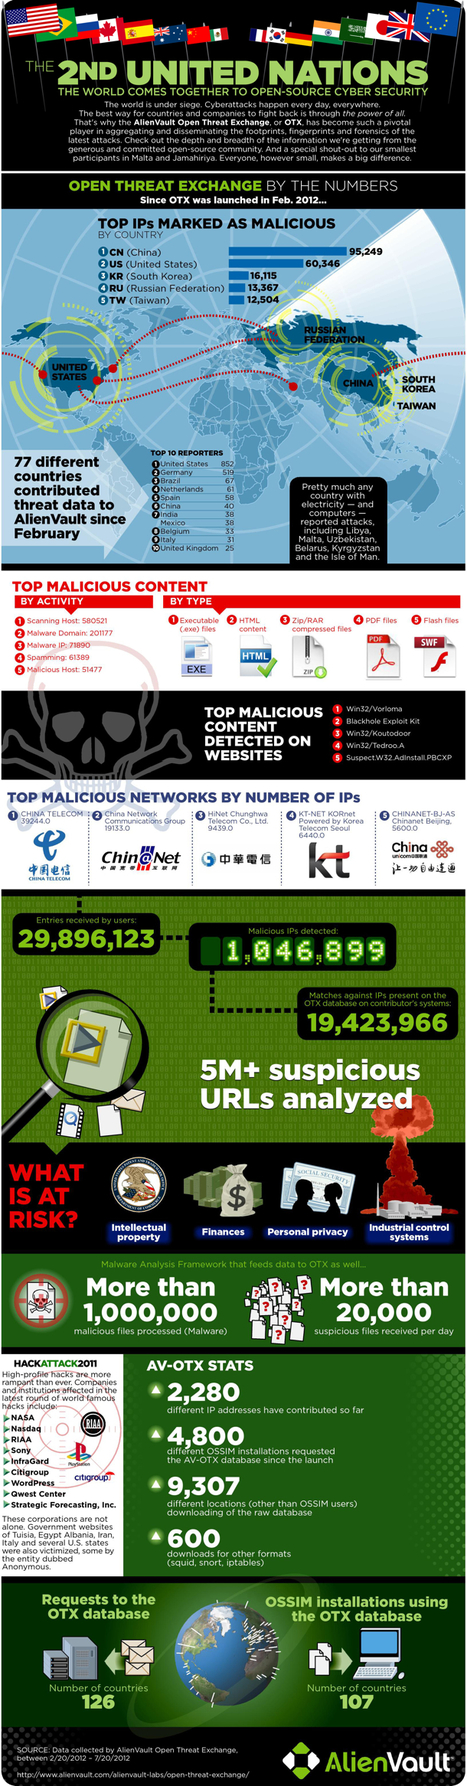 Why Cyber Security is Important [Infographic] | Apple, Mac, MacOS, iOS4, iPad, iPhone and (in)security... | Scoop.it